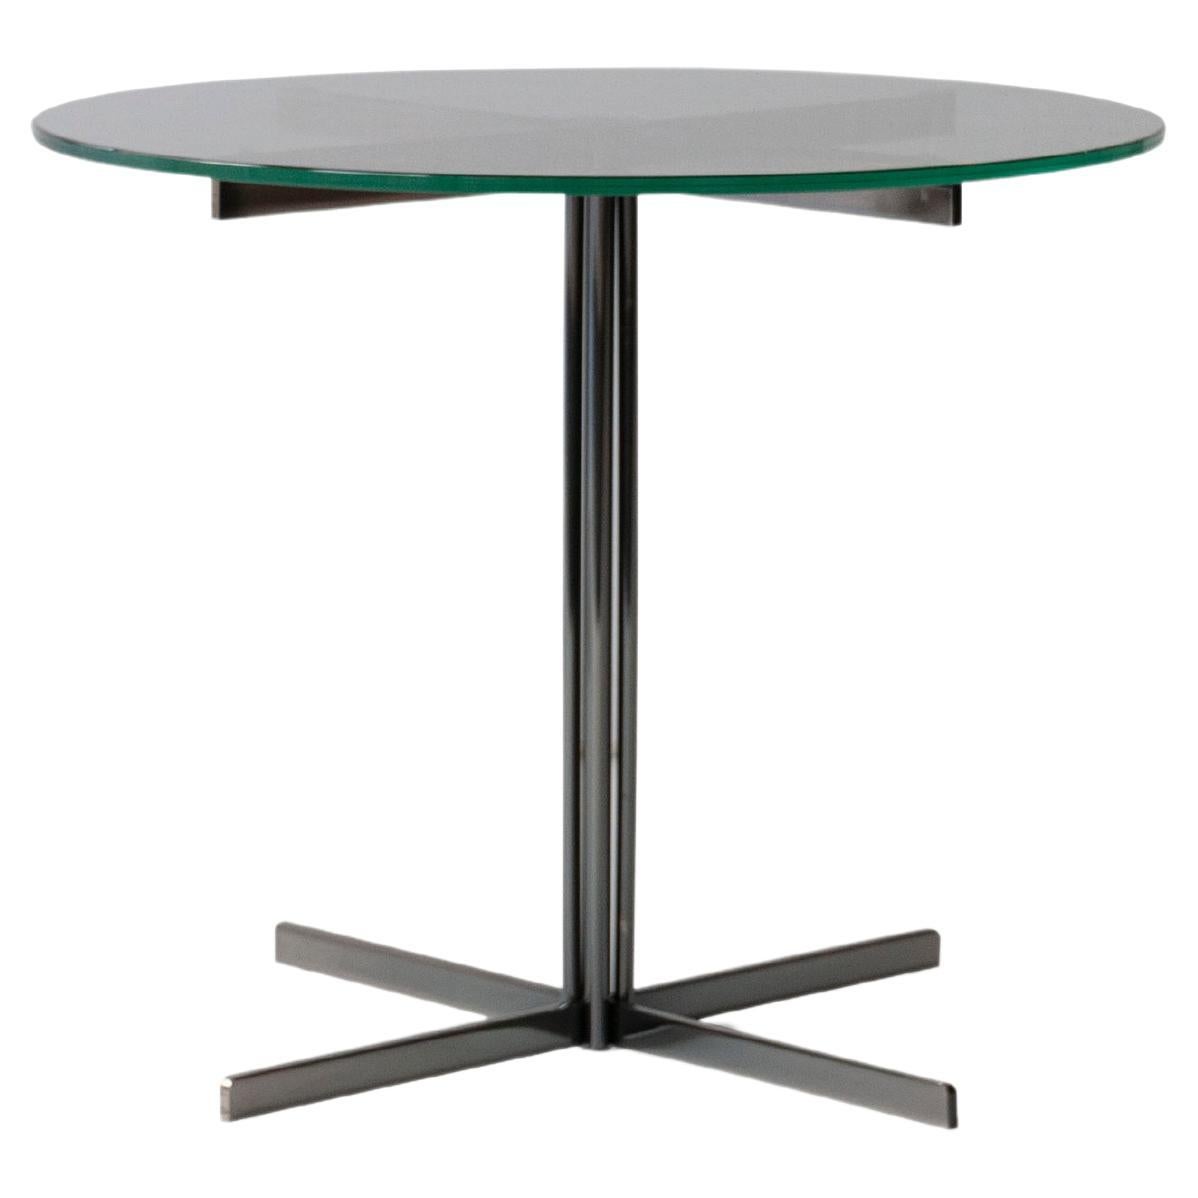 Small Round Marble / Glass Low Table Stainless Steel Foot 3 Finishes